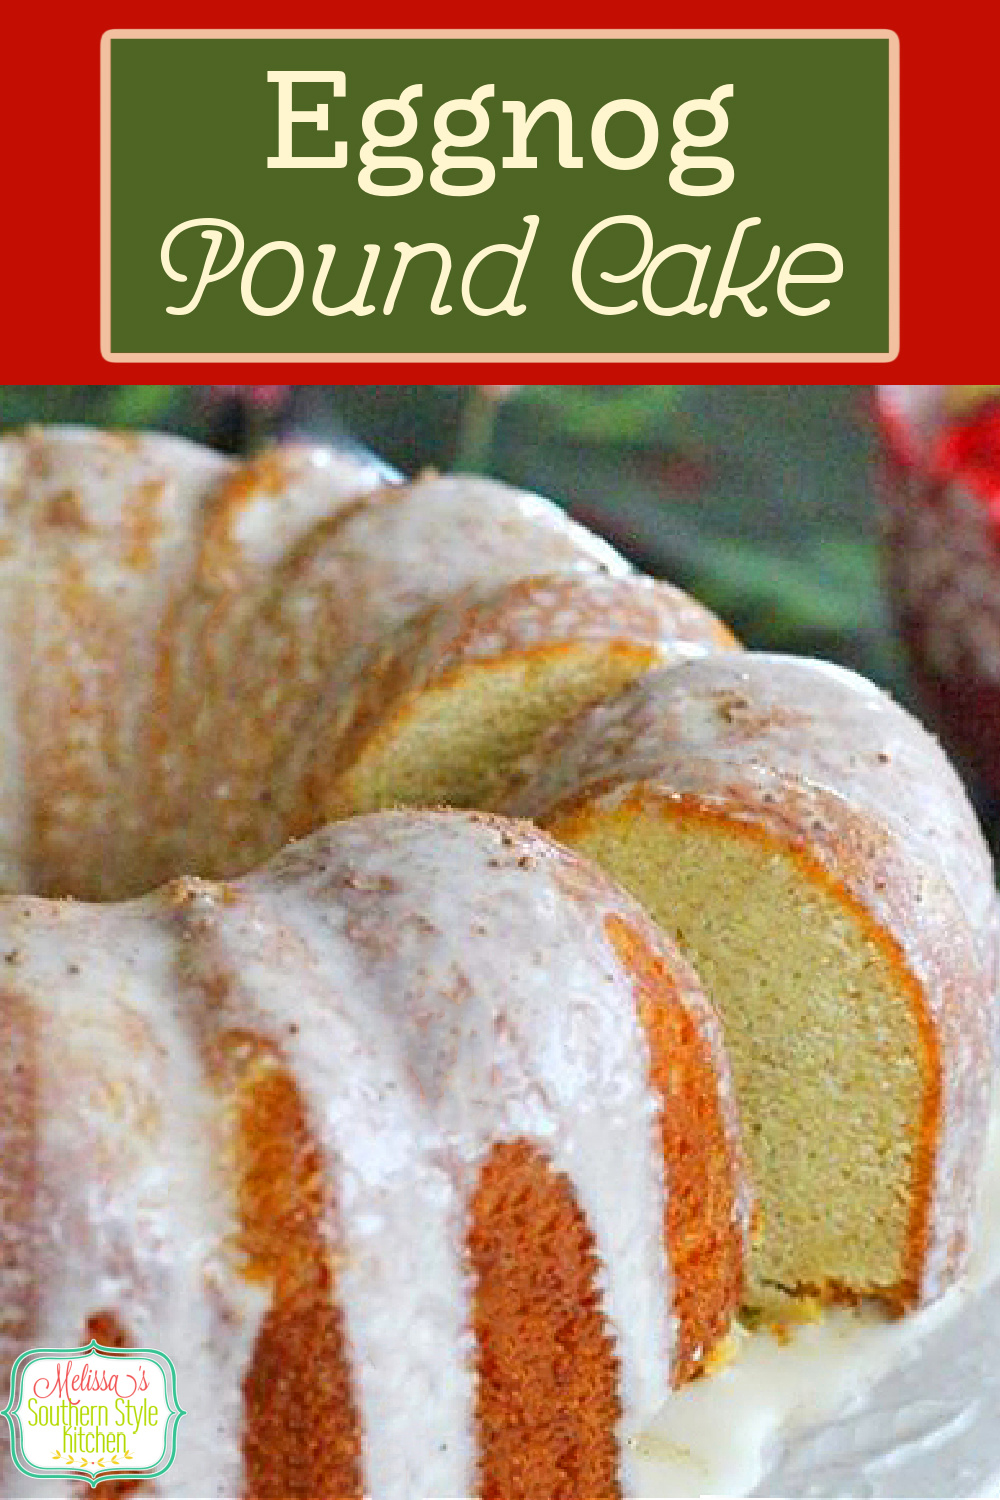 Enjoy the best of the season with this made from scratch Eggnog Pound Cake #eggnog #eggnogpoundcake #poundcakerecipes #southernpoundcake #eggnogcake #christmasrecipes #holidaybaking #christmasdesserts #thanksgiving #poundcake #southernfood #southernrecipes